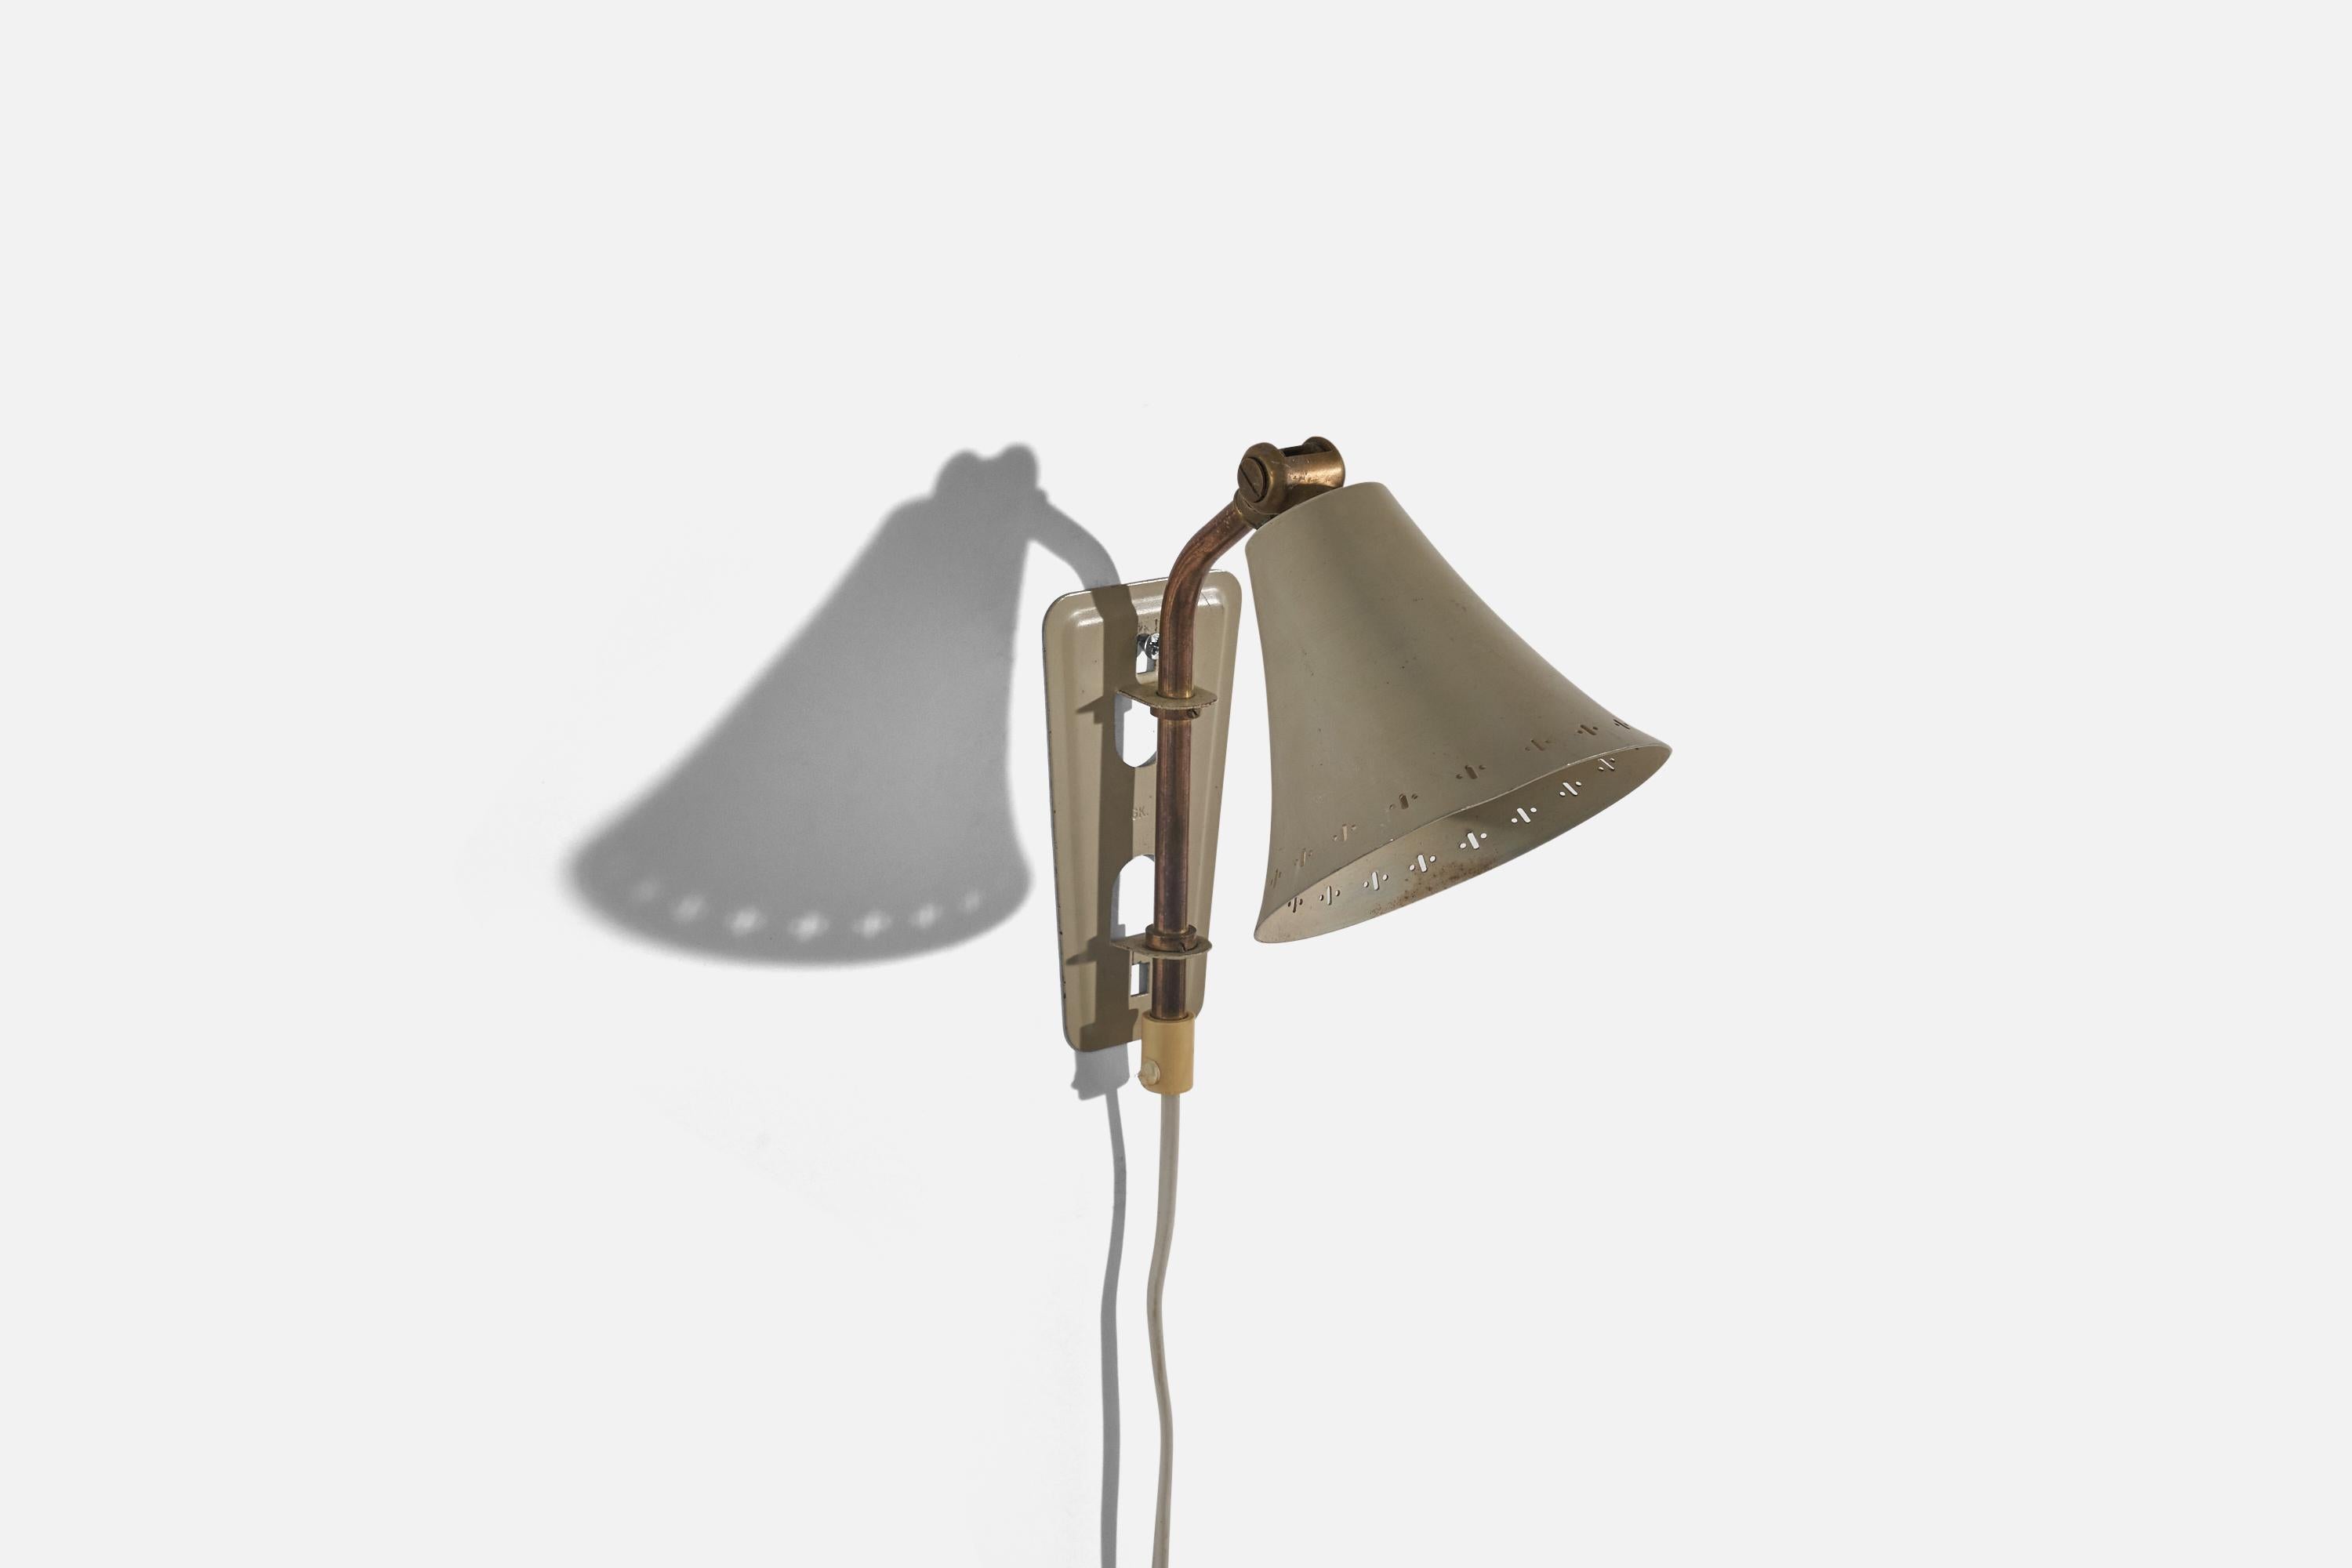 A brass and lacquered metal wall light designed and produced in Sweden, c. 1950s.

Dimensions of back plate (inches) : 5.0625 x 2.75 x .125 (H x W x D).